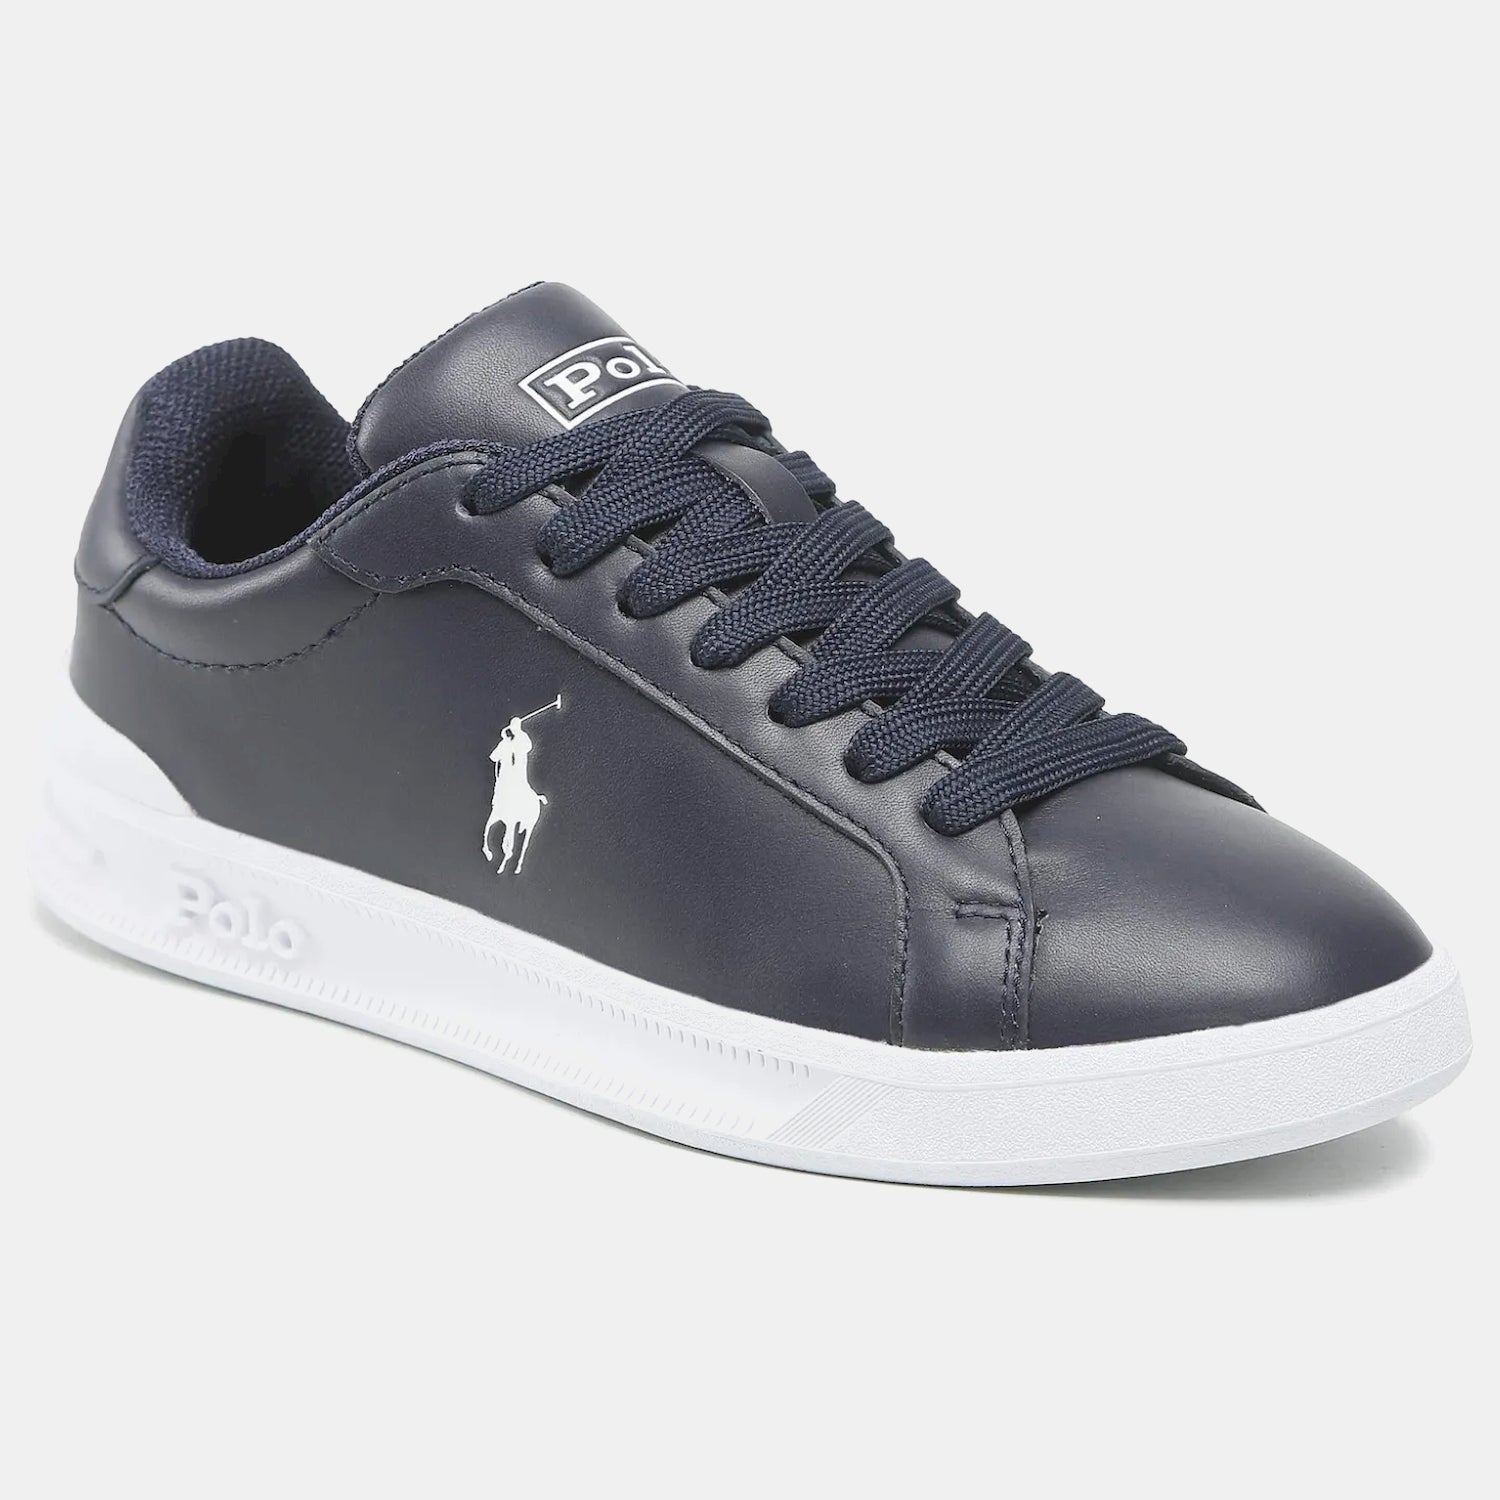 Ralph Lauren Sapatilhas Sneakers Shoes Hrtctii Sk Ath Navy White Navy Branco_shot5